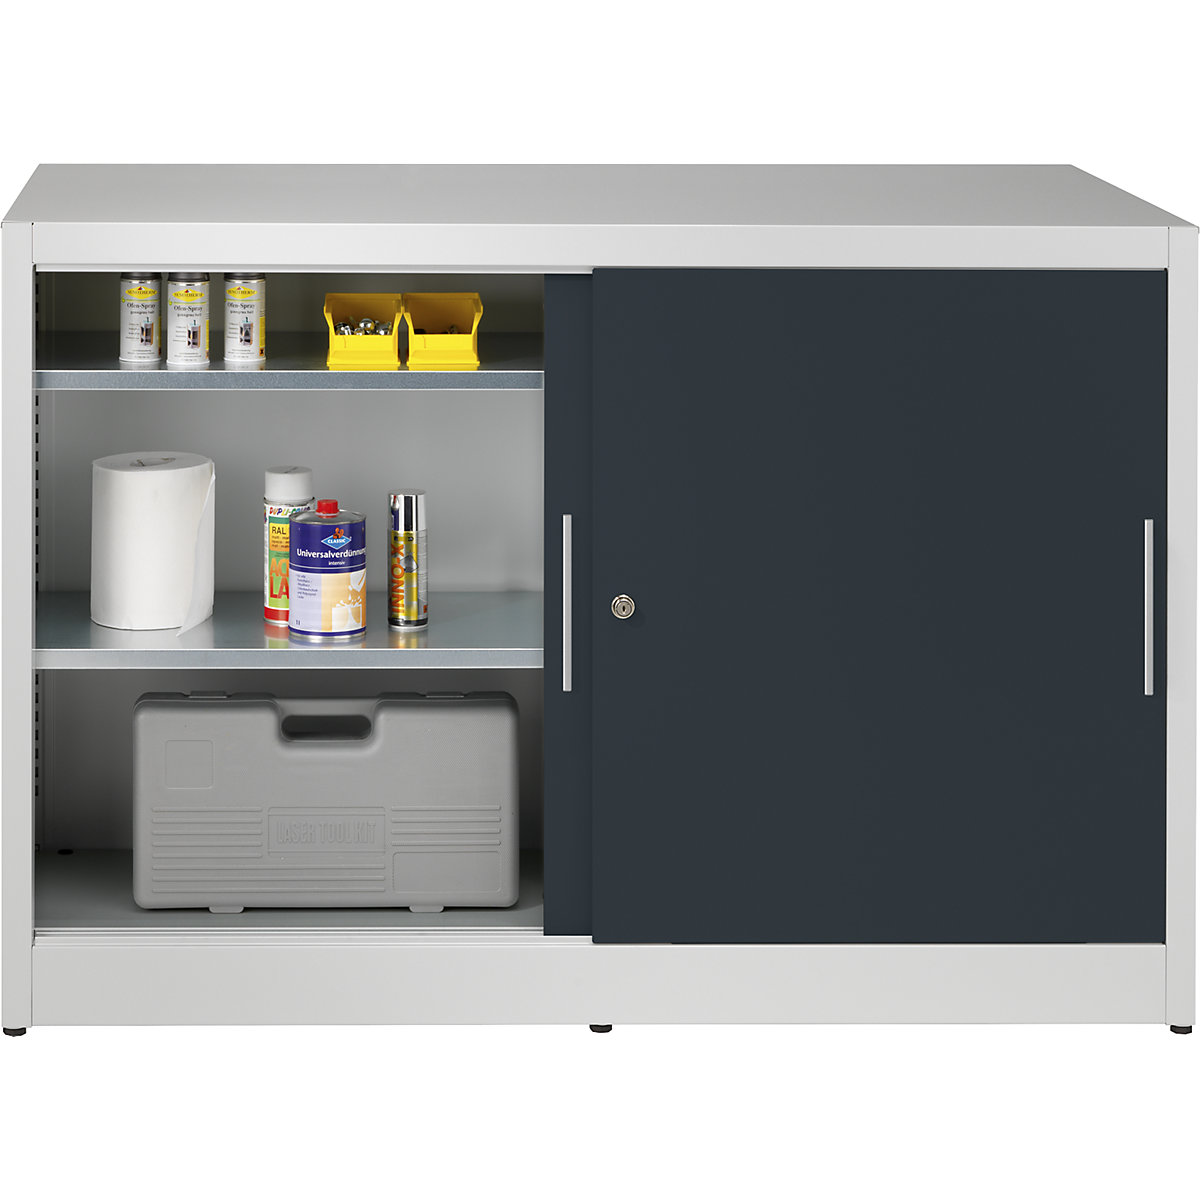 Sliding door cupboard, height 1000 mm – eurokraft pro, with centre partition and 2 x 2 shelves, width 1500 mm, depth 600 mm, doors charcoal RAL 7016-2